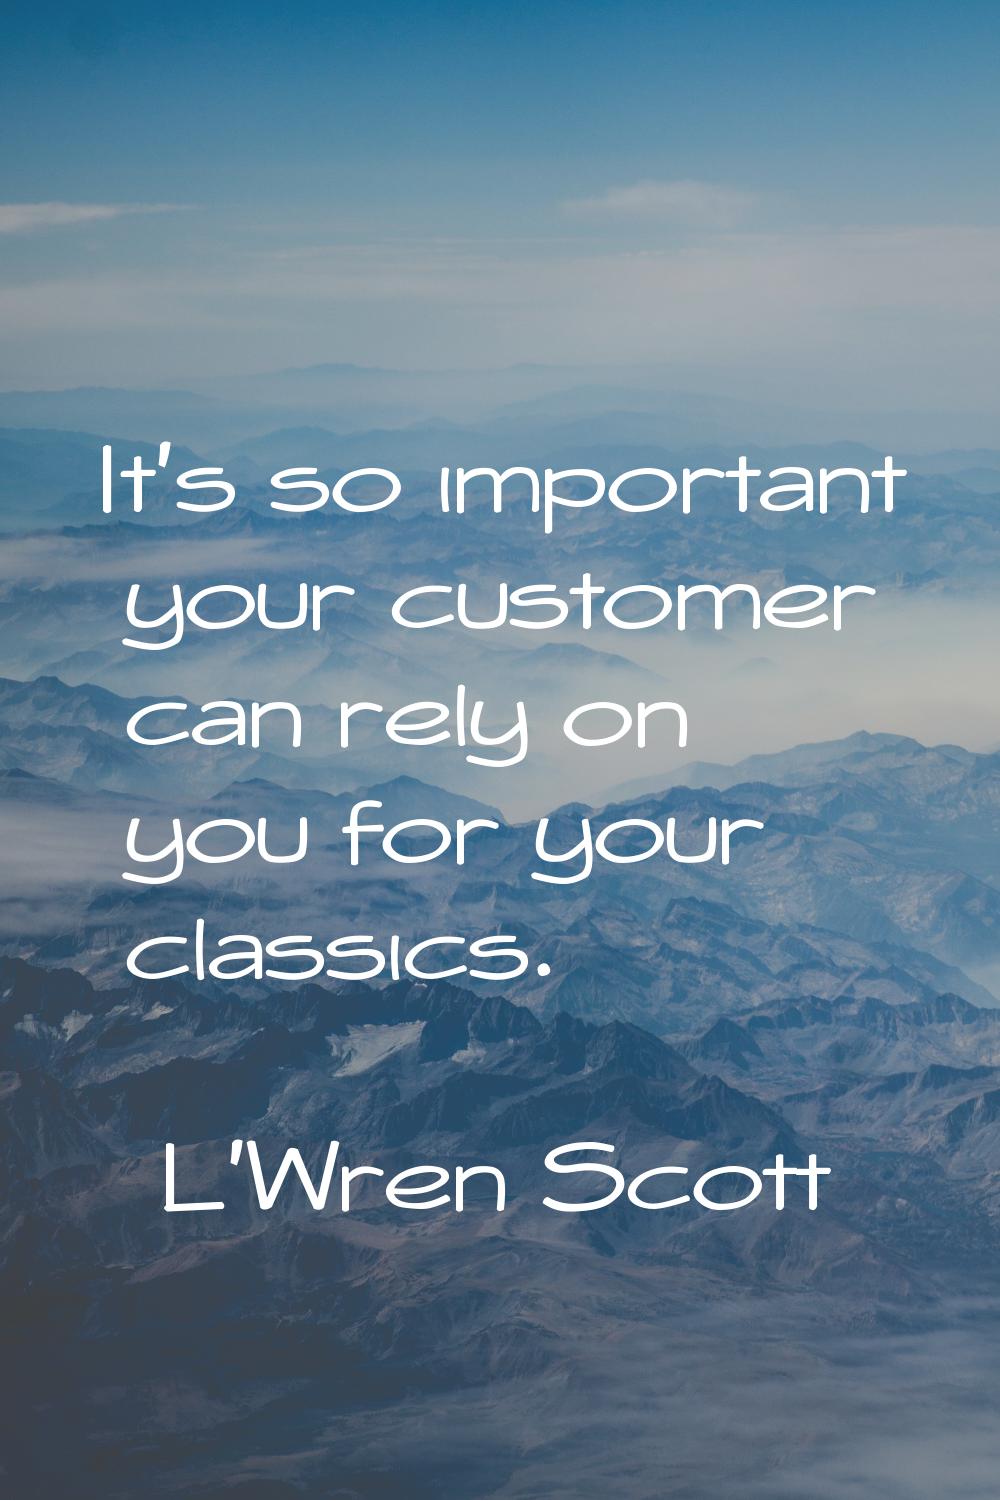 It's so important your customer can rely on you for your classics.